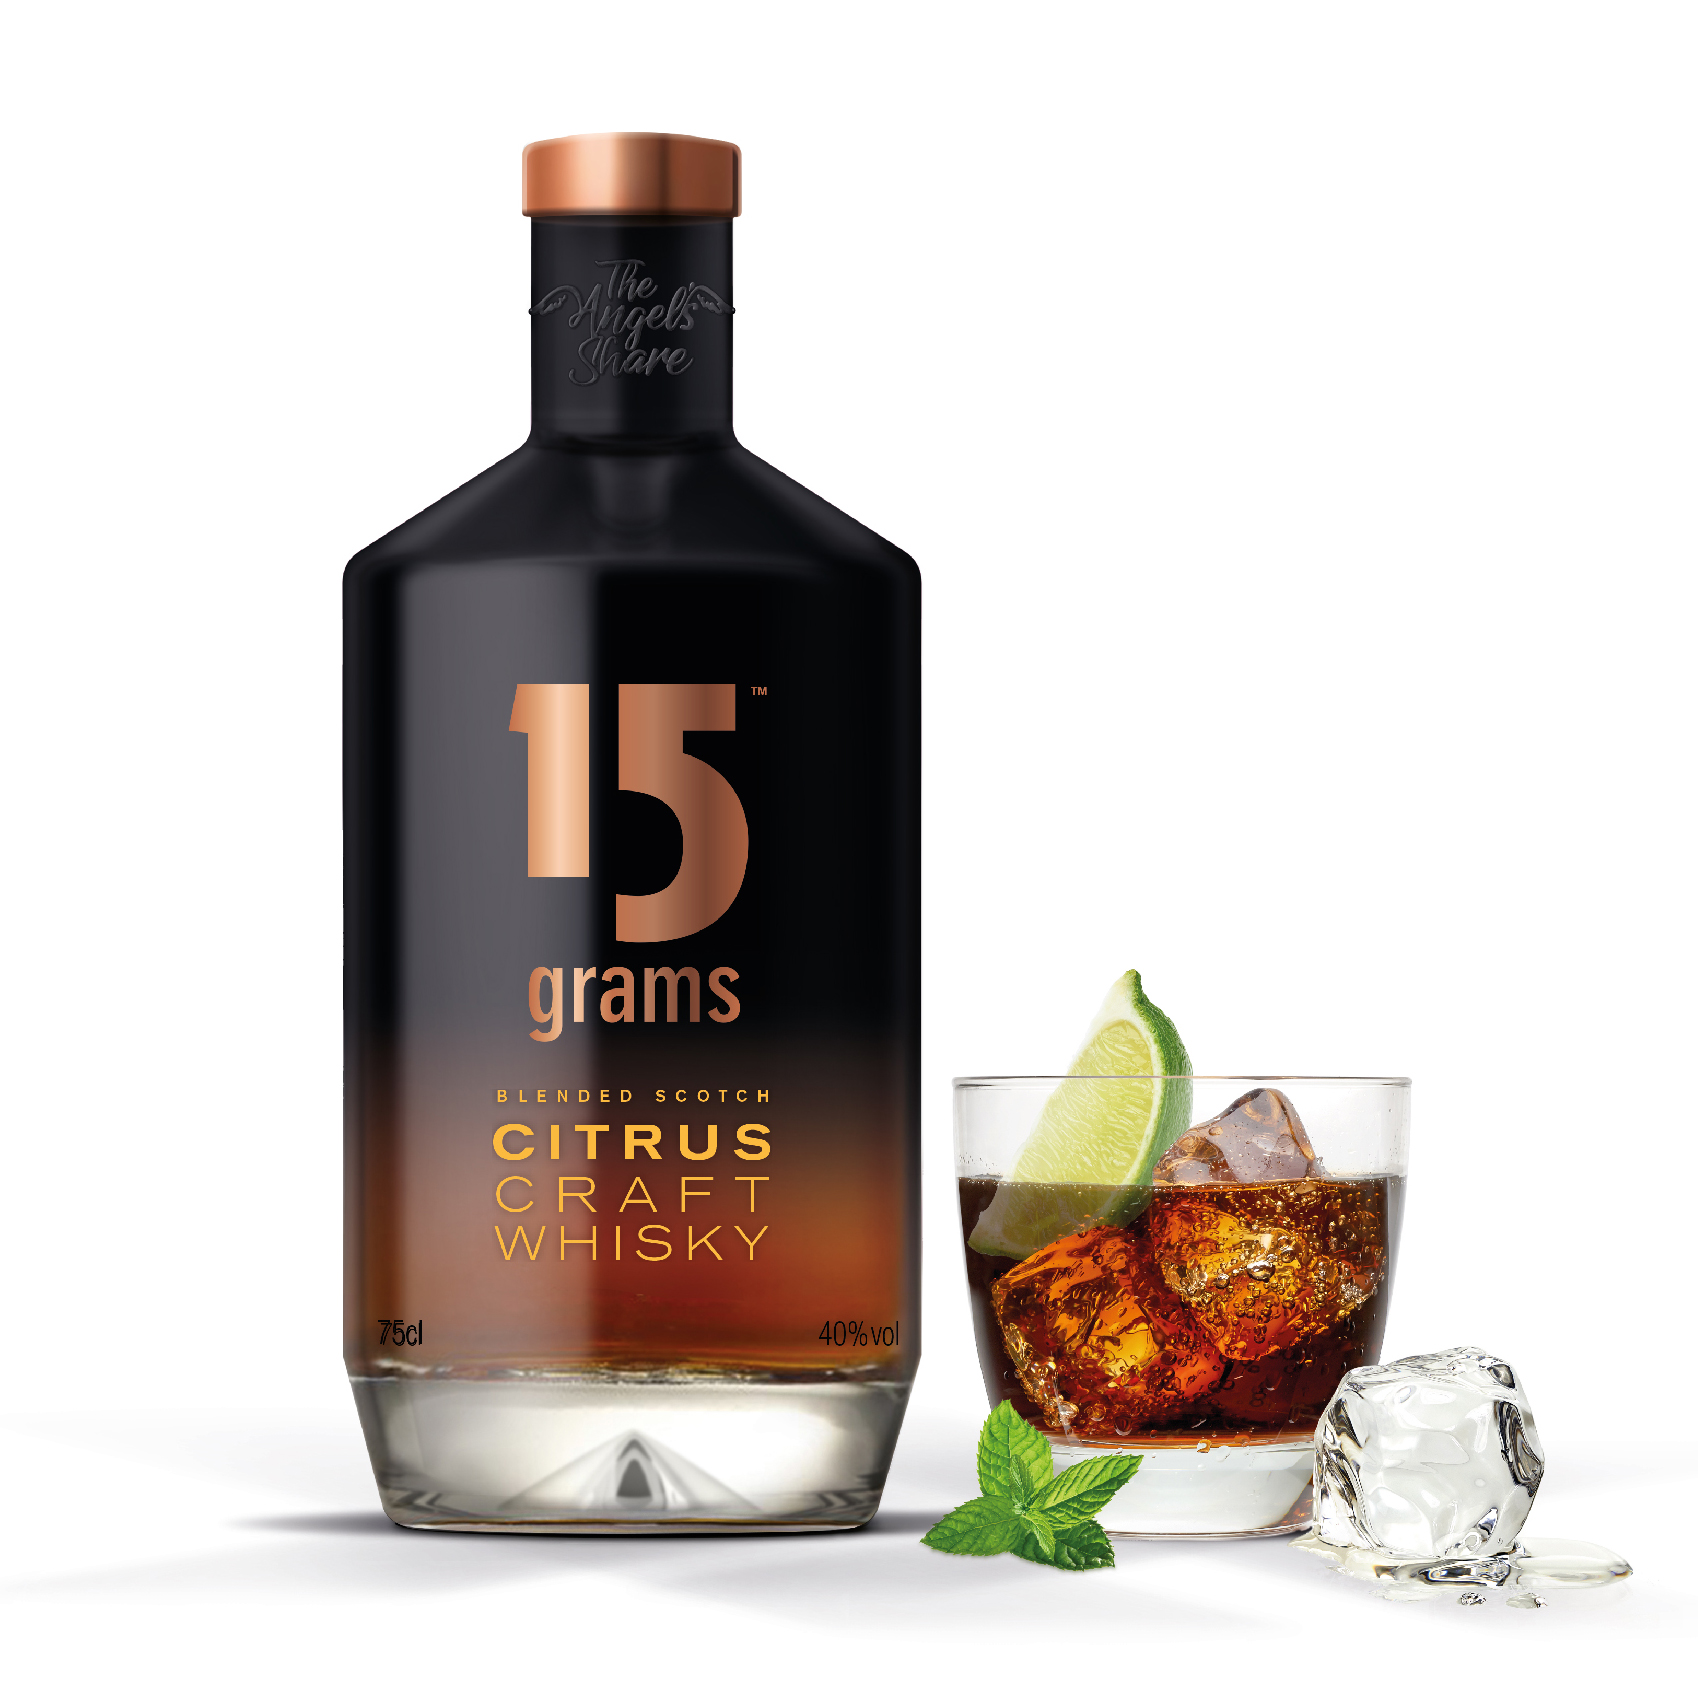 15G Spiced Rum Design Concept by Biles Hendry